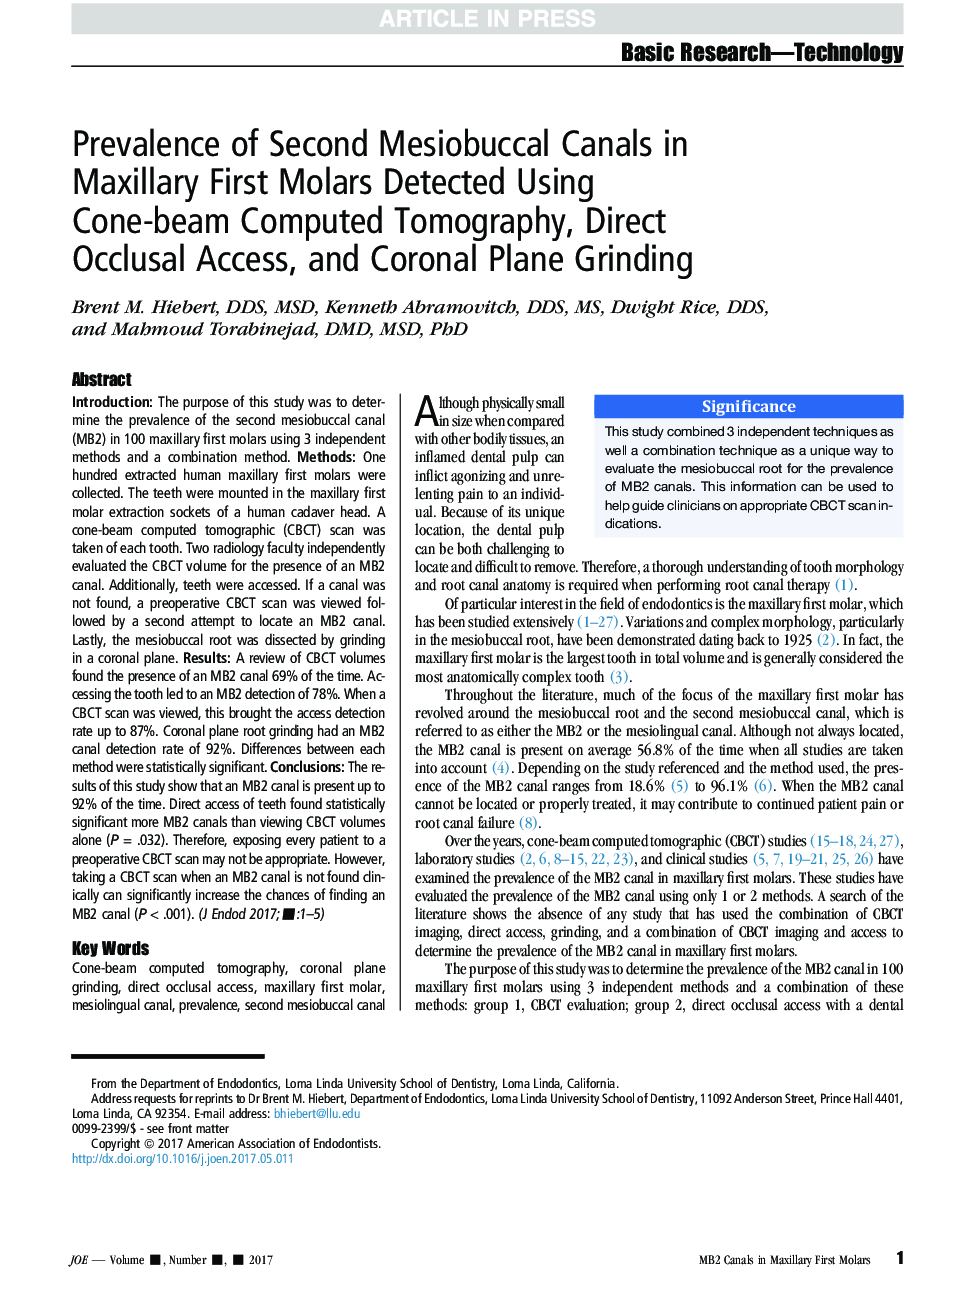 Prevalence of Second Mesiobuccal Canals in Maxillary First Molars Detected Using Cone-beam Computed Tomography, Direct Occlusal Access, and Coronal Plane Grinding